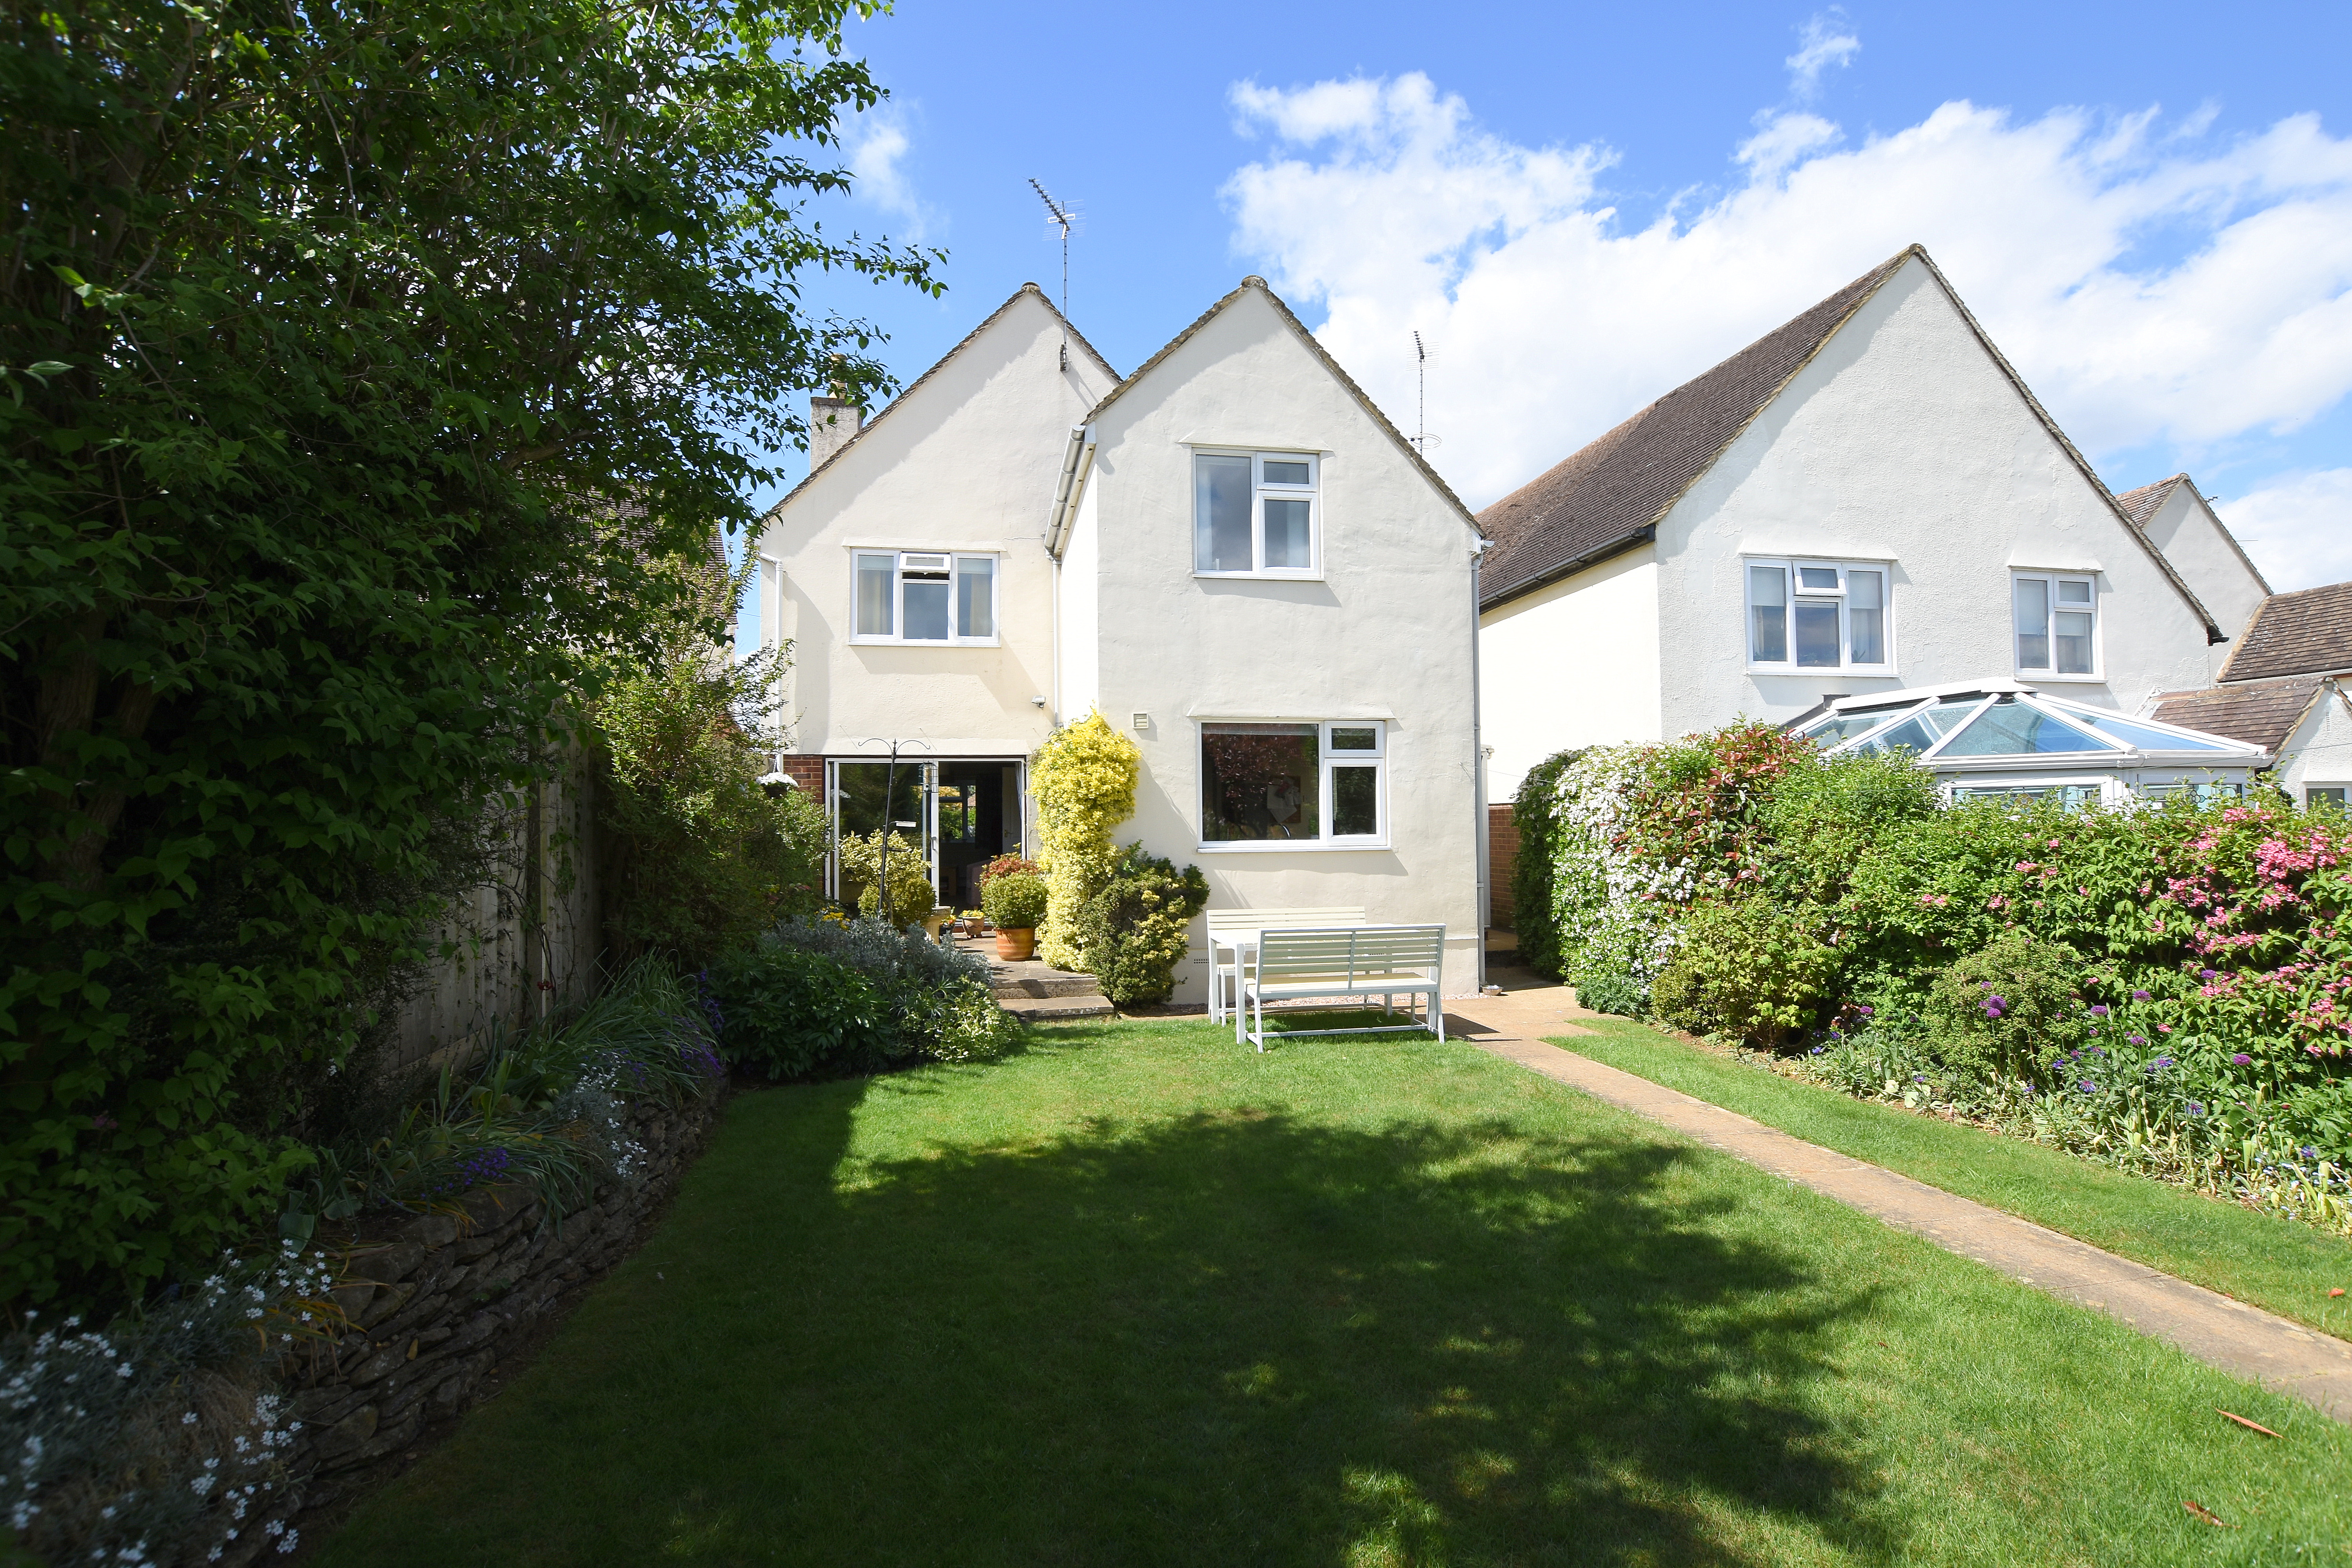 4 bed  for sale in Church View, Banbury 0